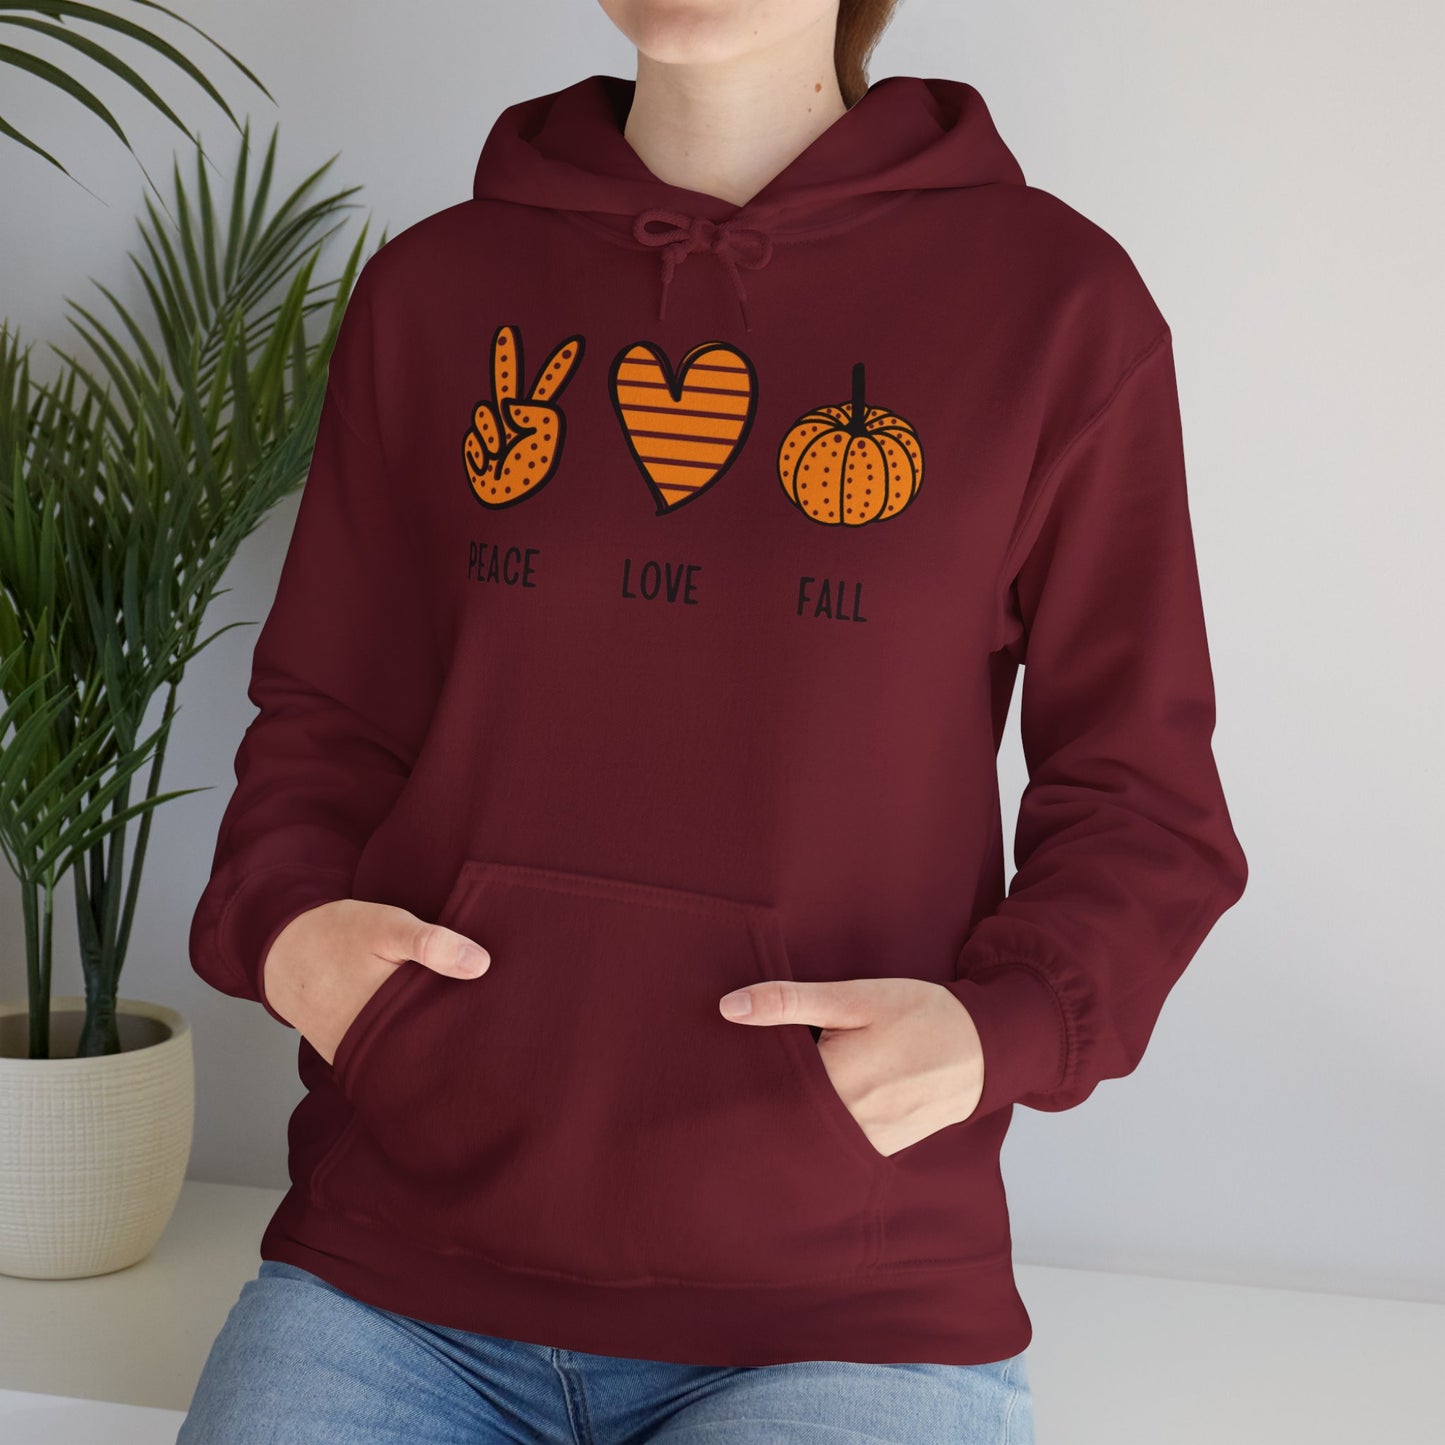 Peace Love Fall Hoodie - Embrace Autumn Vibes with Peace, Heart, and Pumpkin Design